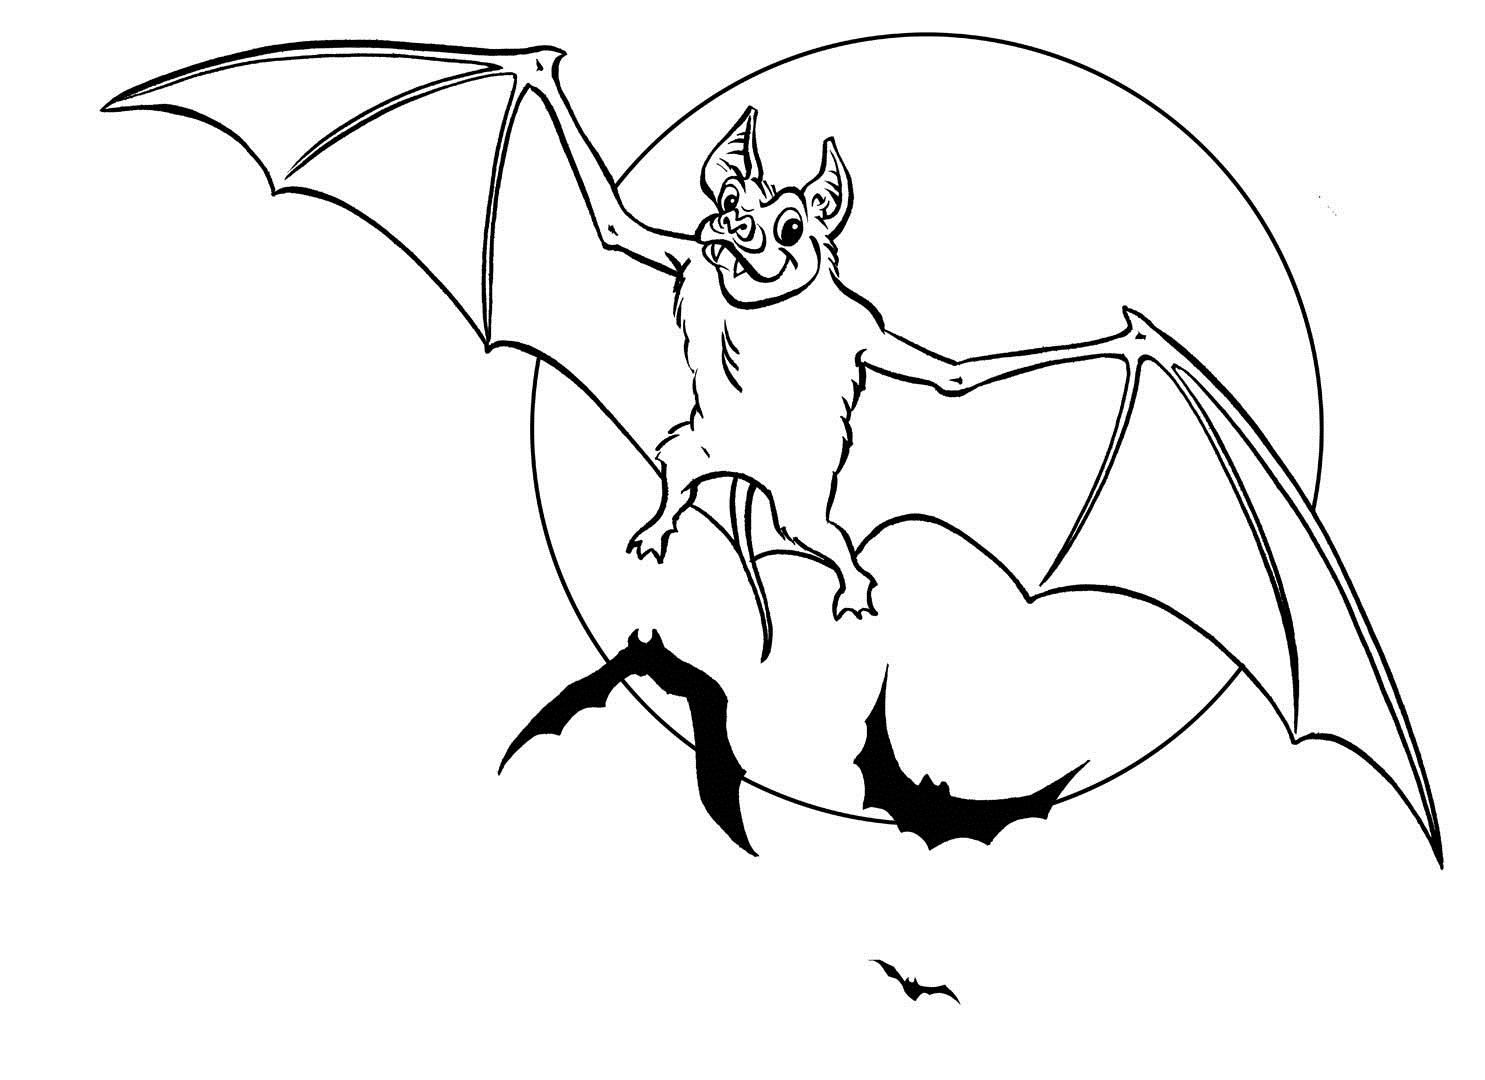 An anatomically detailed bat coloring page